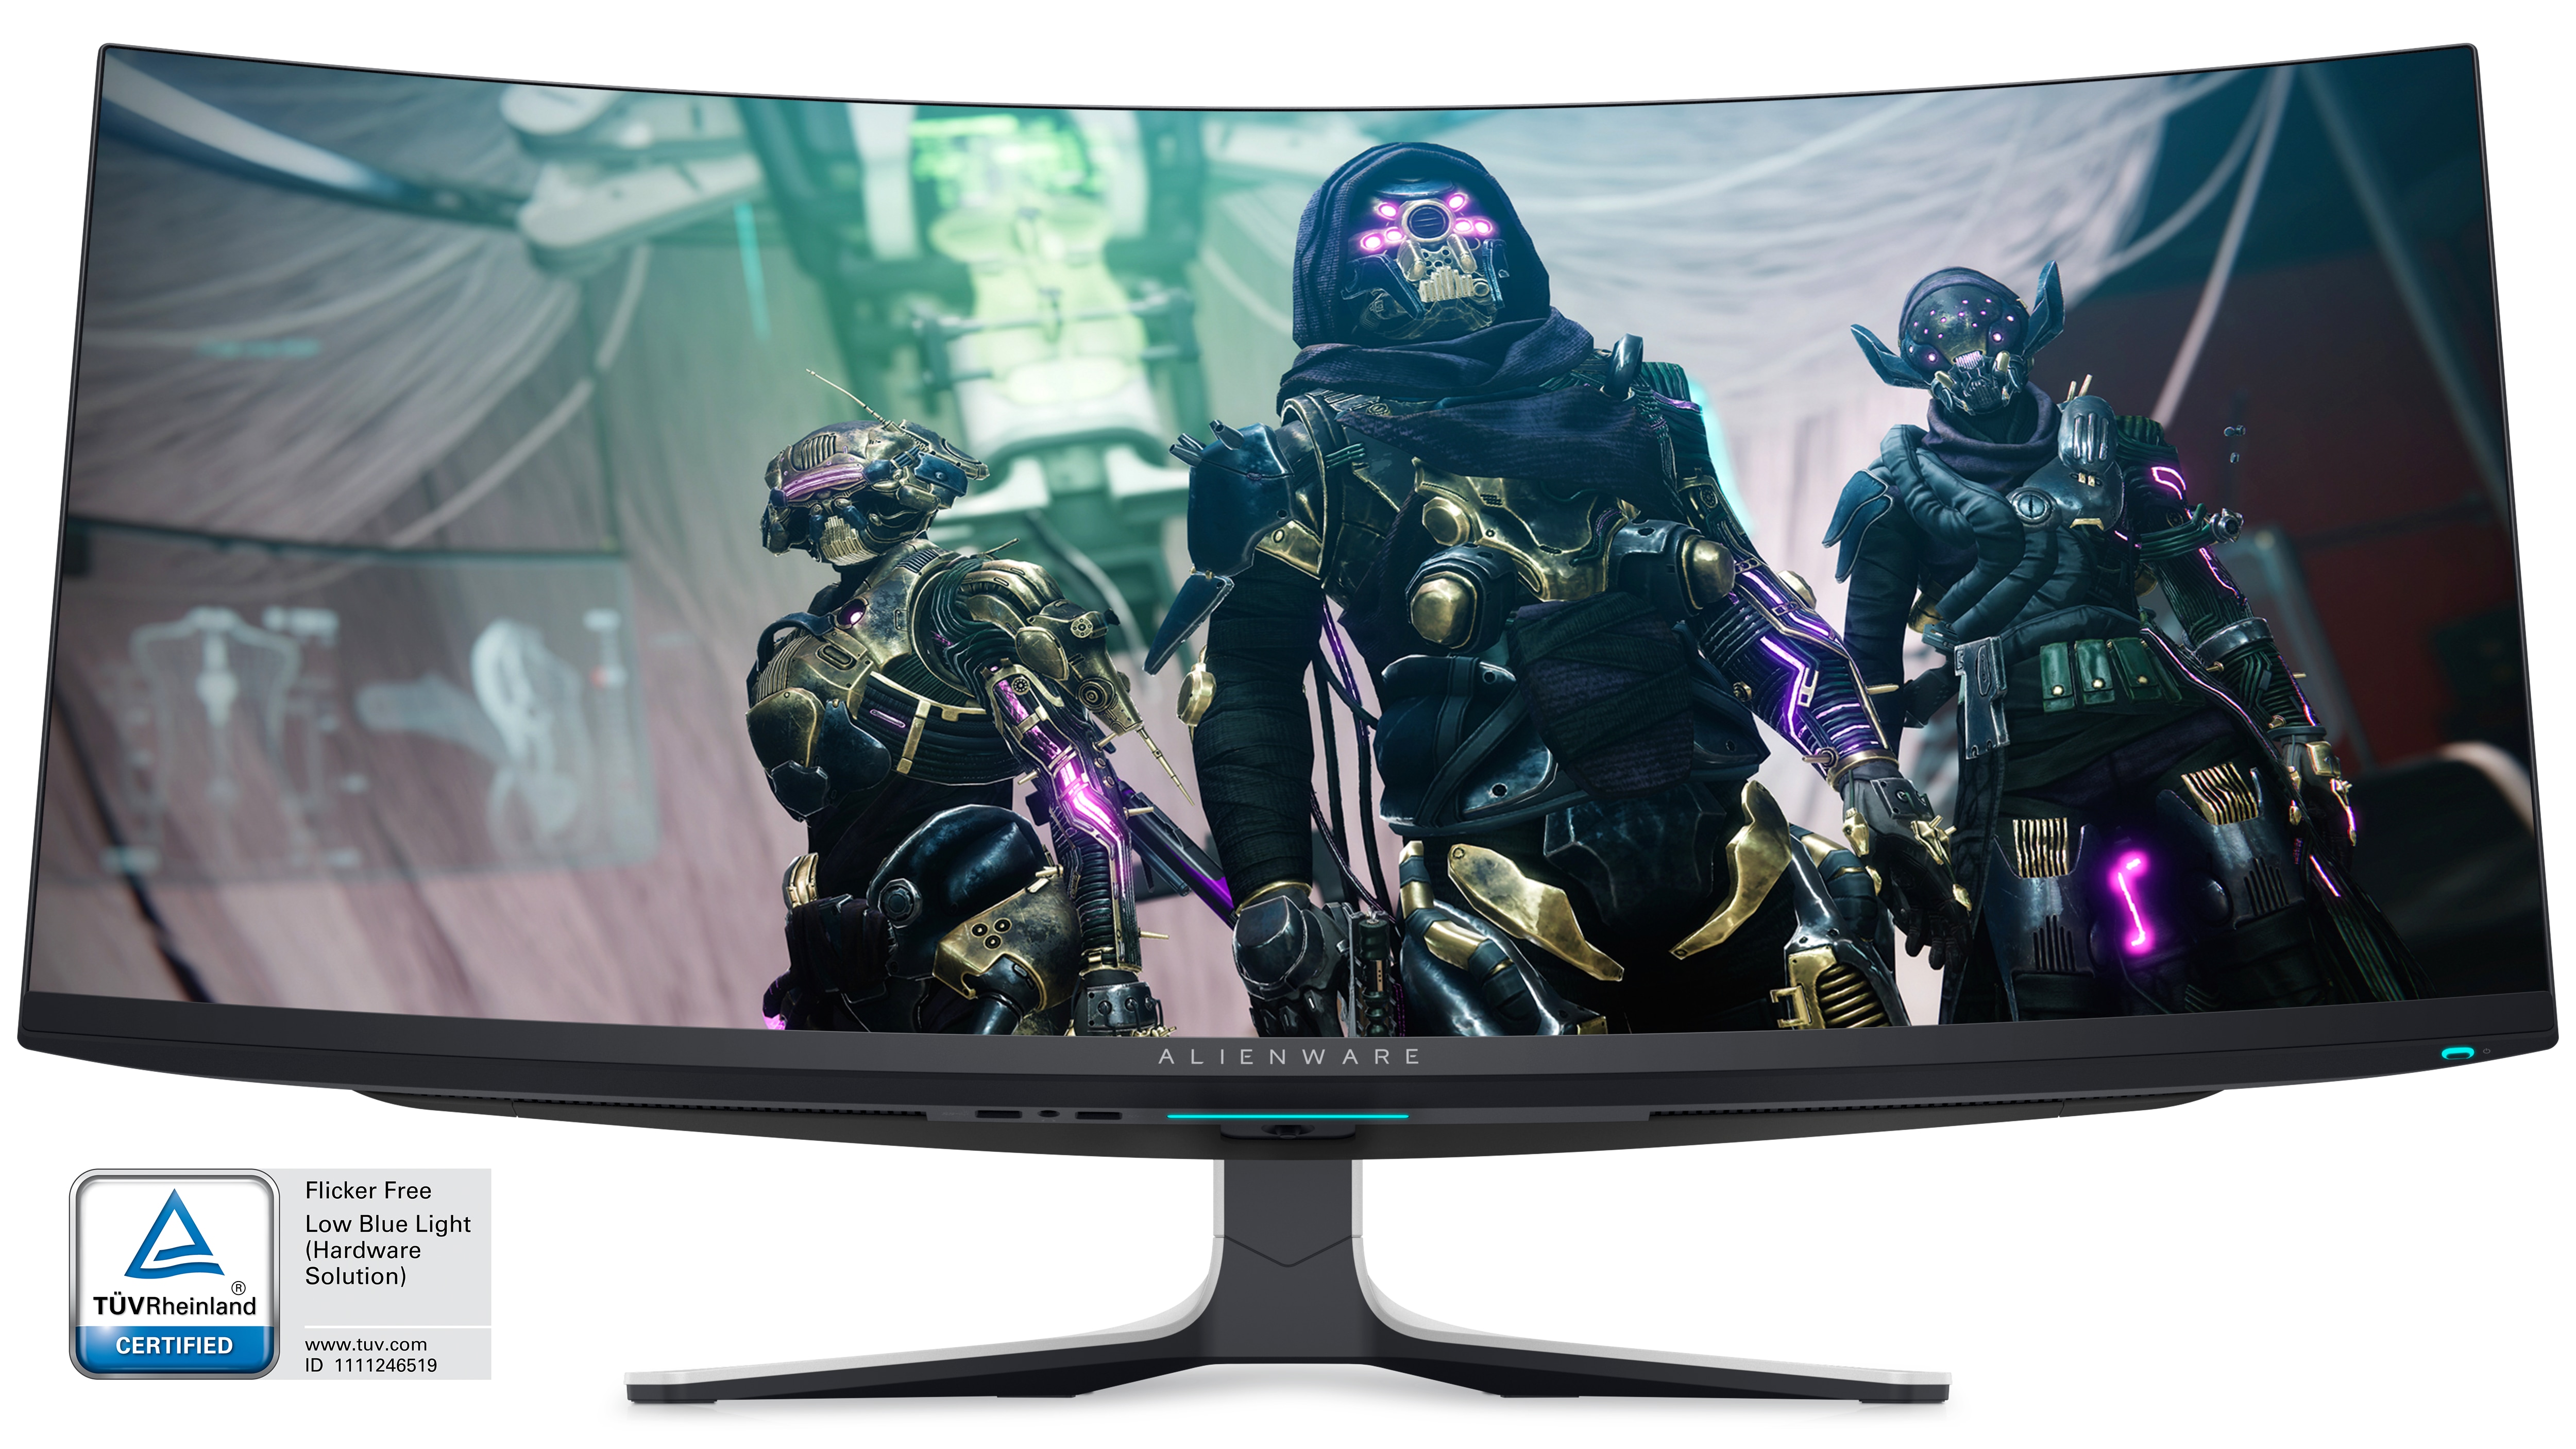 Picture of a Dell Alienware AW3423DW Monitor with a game image on the screen.